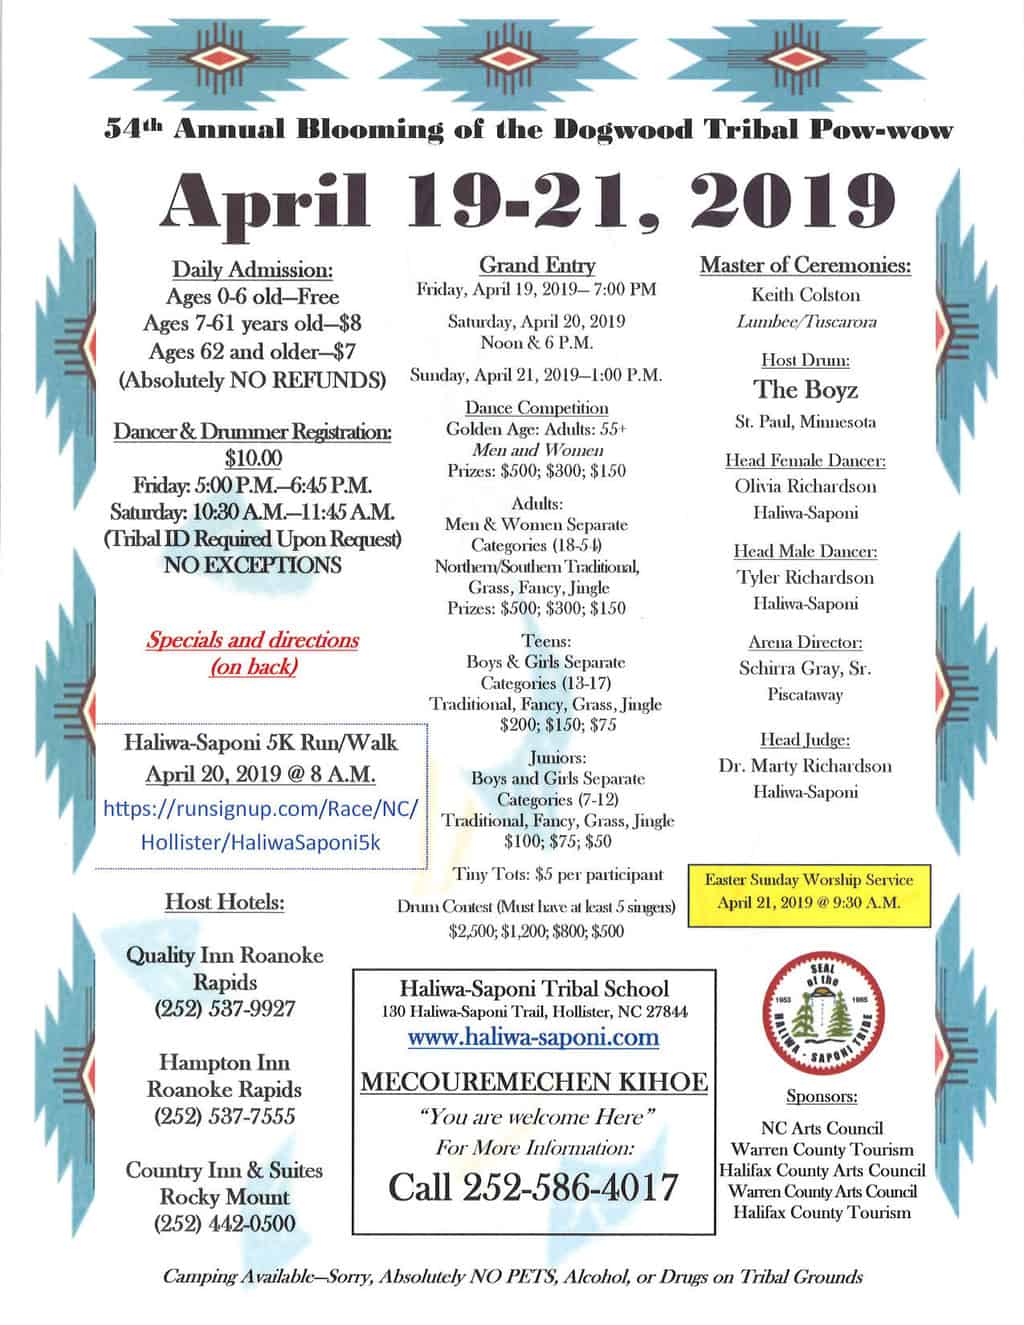 54th Annual Blooming of the Dogwood Tribal Pow Wow (2019)